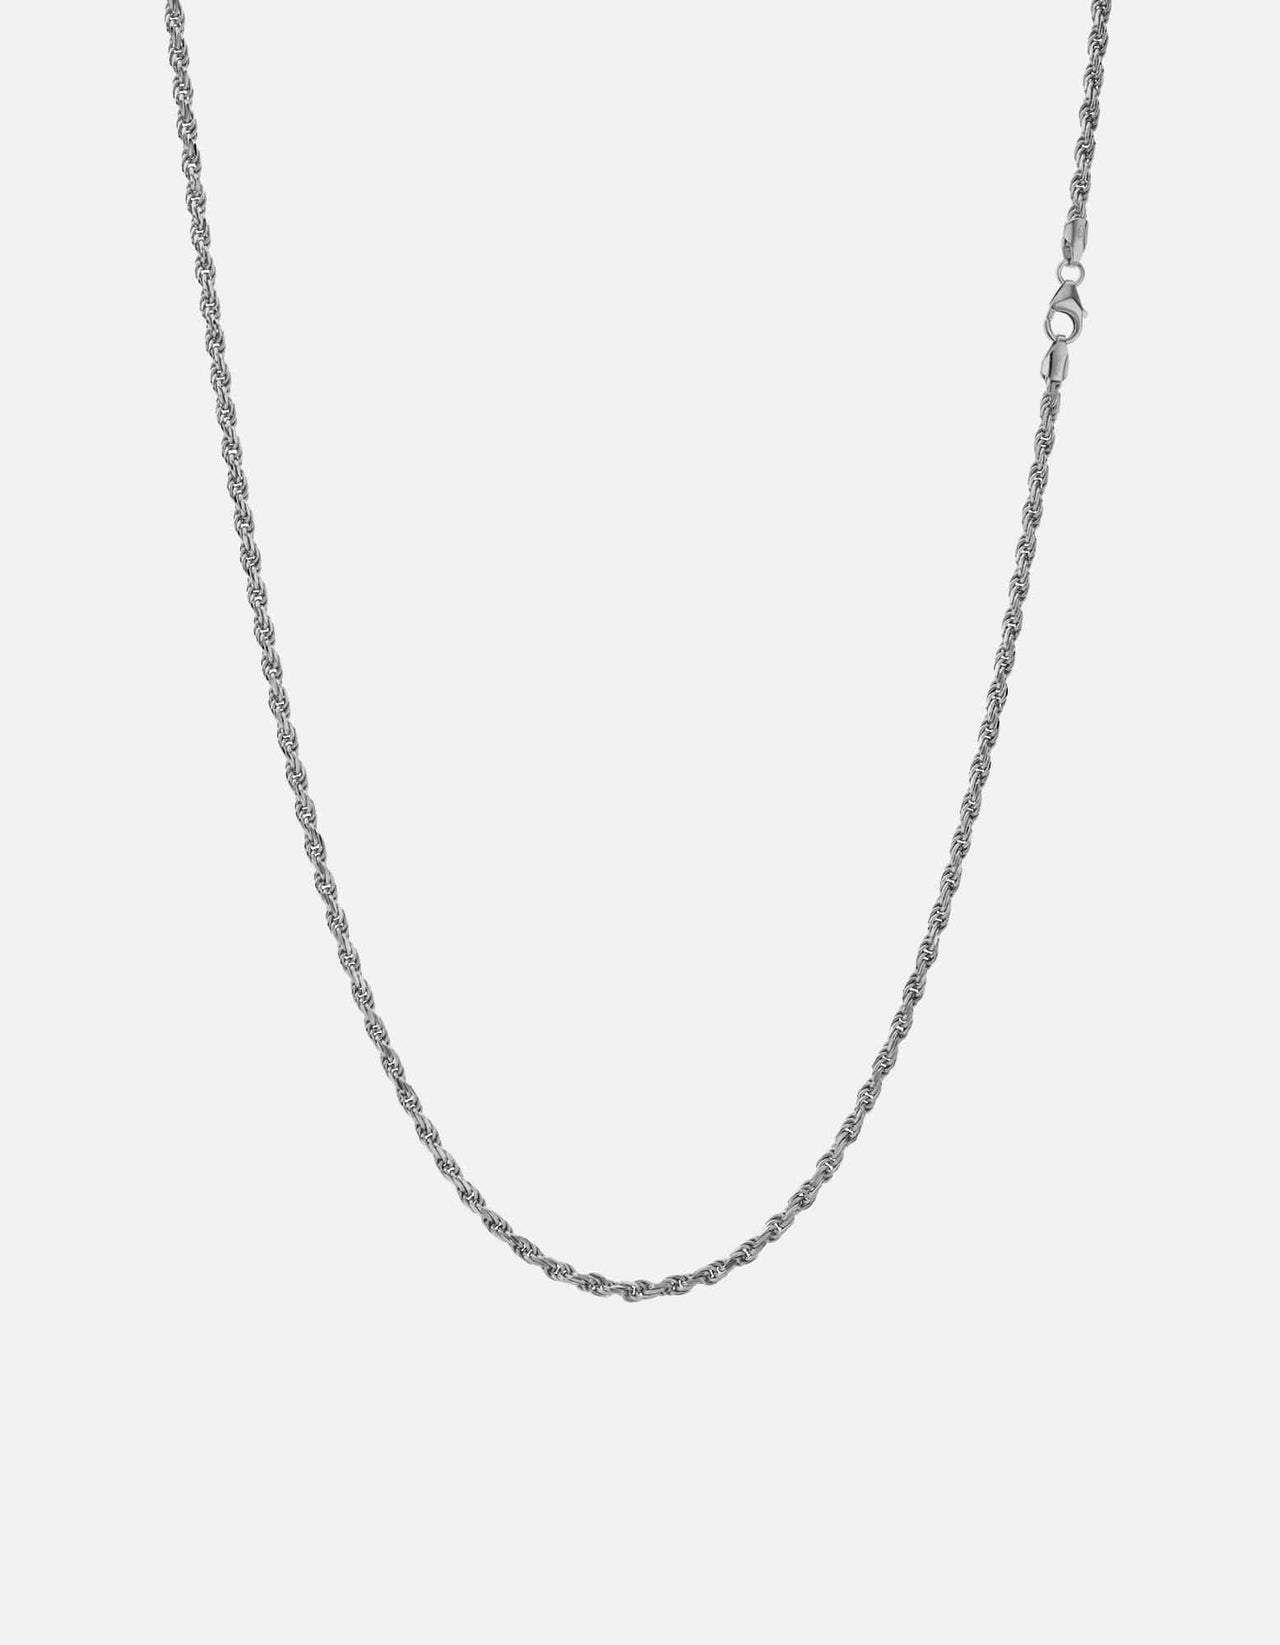 Rope Chain Necklace | Rope Chain Bracelet | Outspoke Official Rhodium / 22 x 24